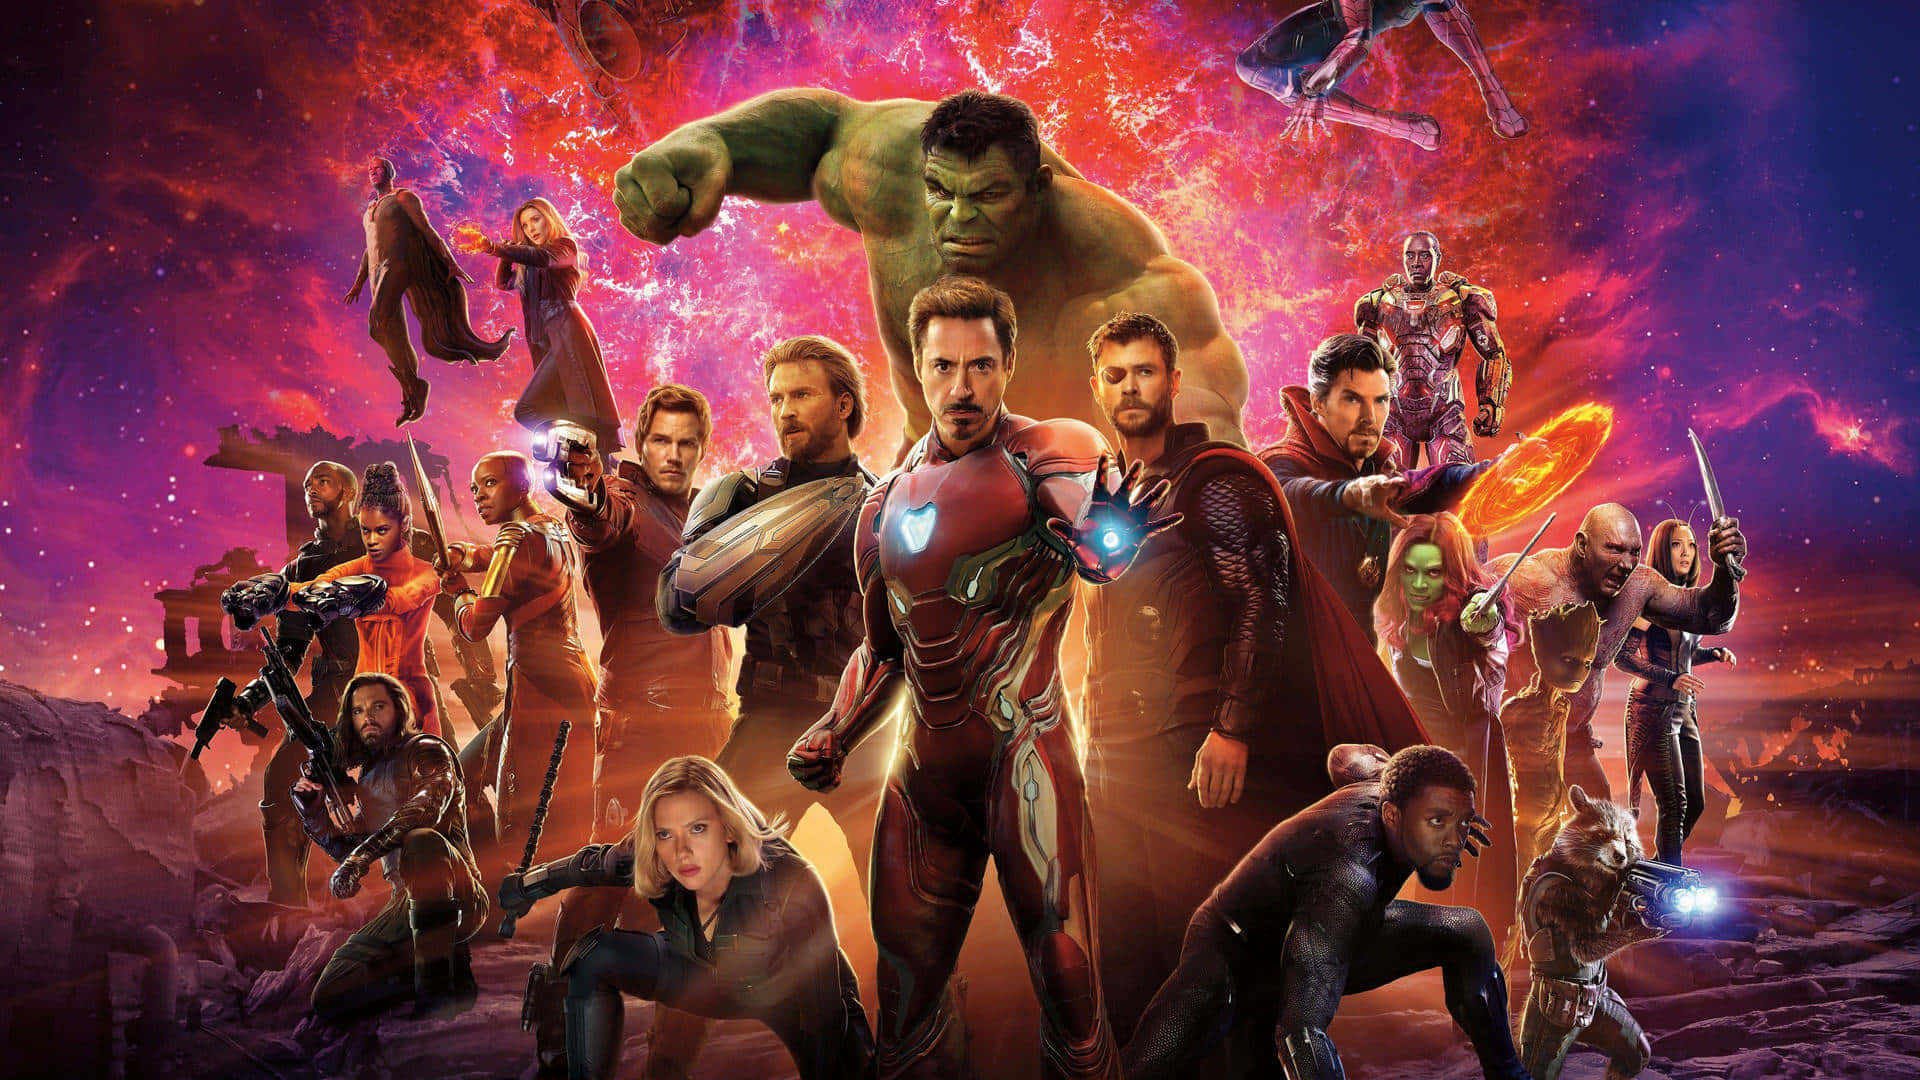 The Avengers Unite in Epic Battle to Protect the Earth Wallpaper